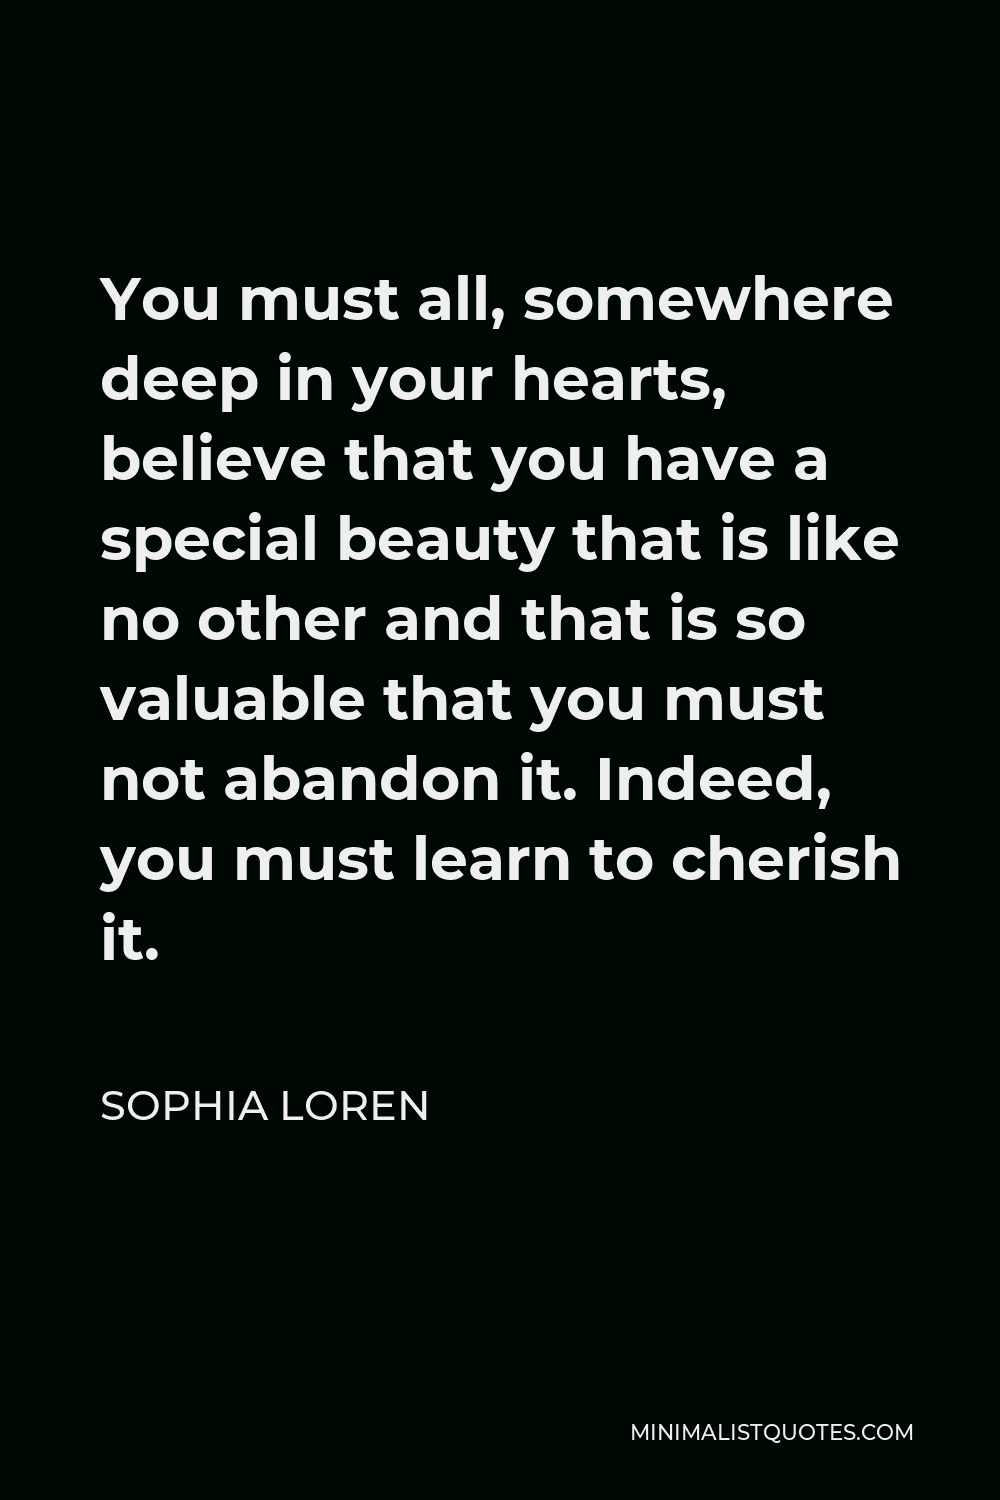 Sophia Loren Quote - You must all, somewhere deep in your hearts, believe that you have a special beauty that is like no other and that is so valuable that you must not abandon it. Indeed, you must learn to cherish it.